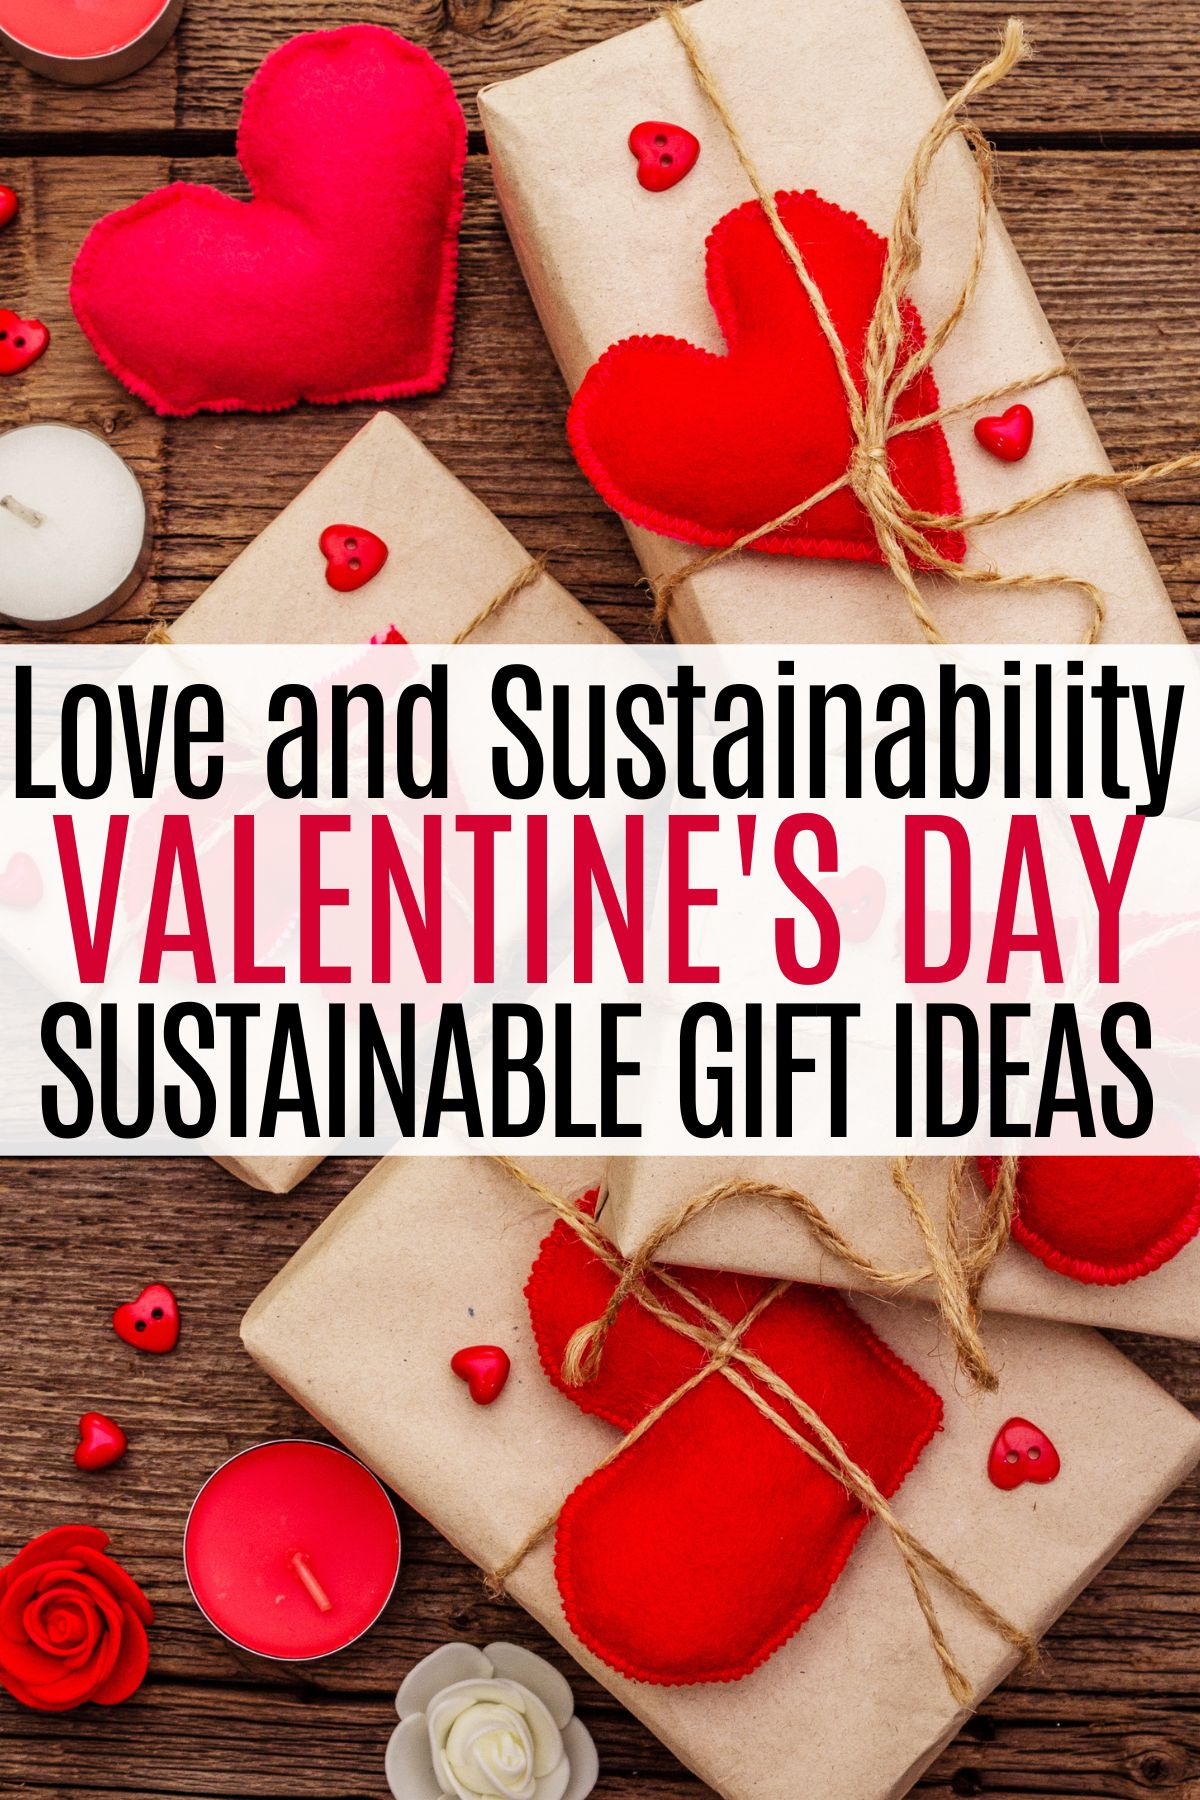 brown paper wrapped gifts with red fabric hearts tied on them and text love and sustainability, Valentine's Day sustainable gift ideas